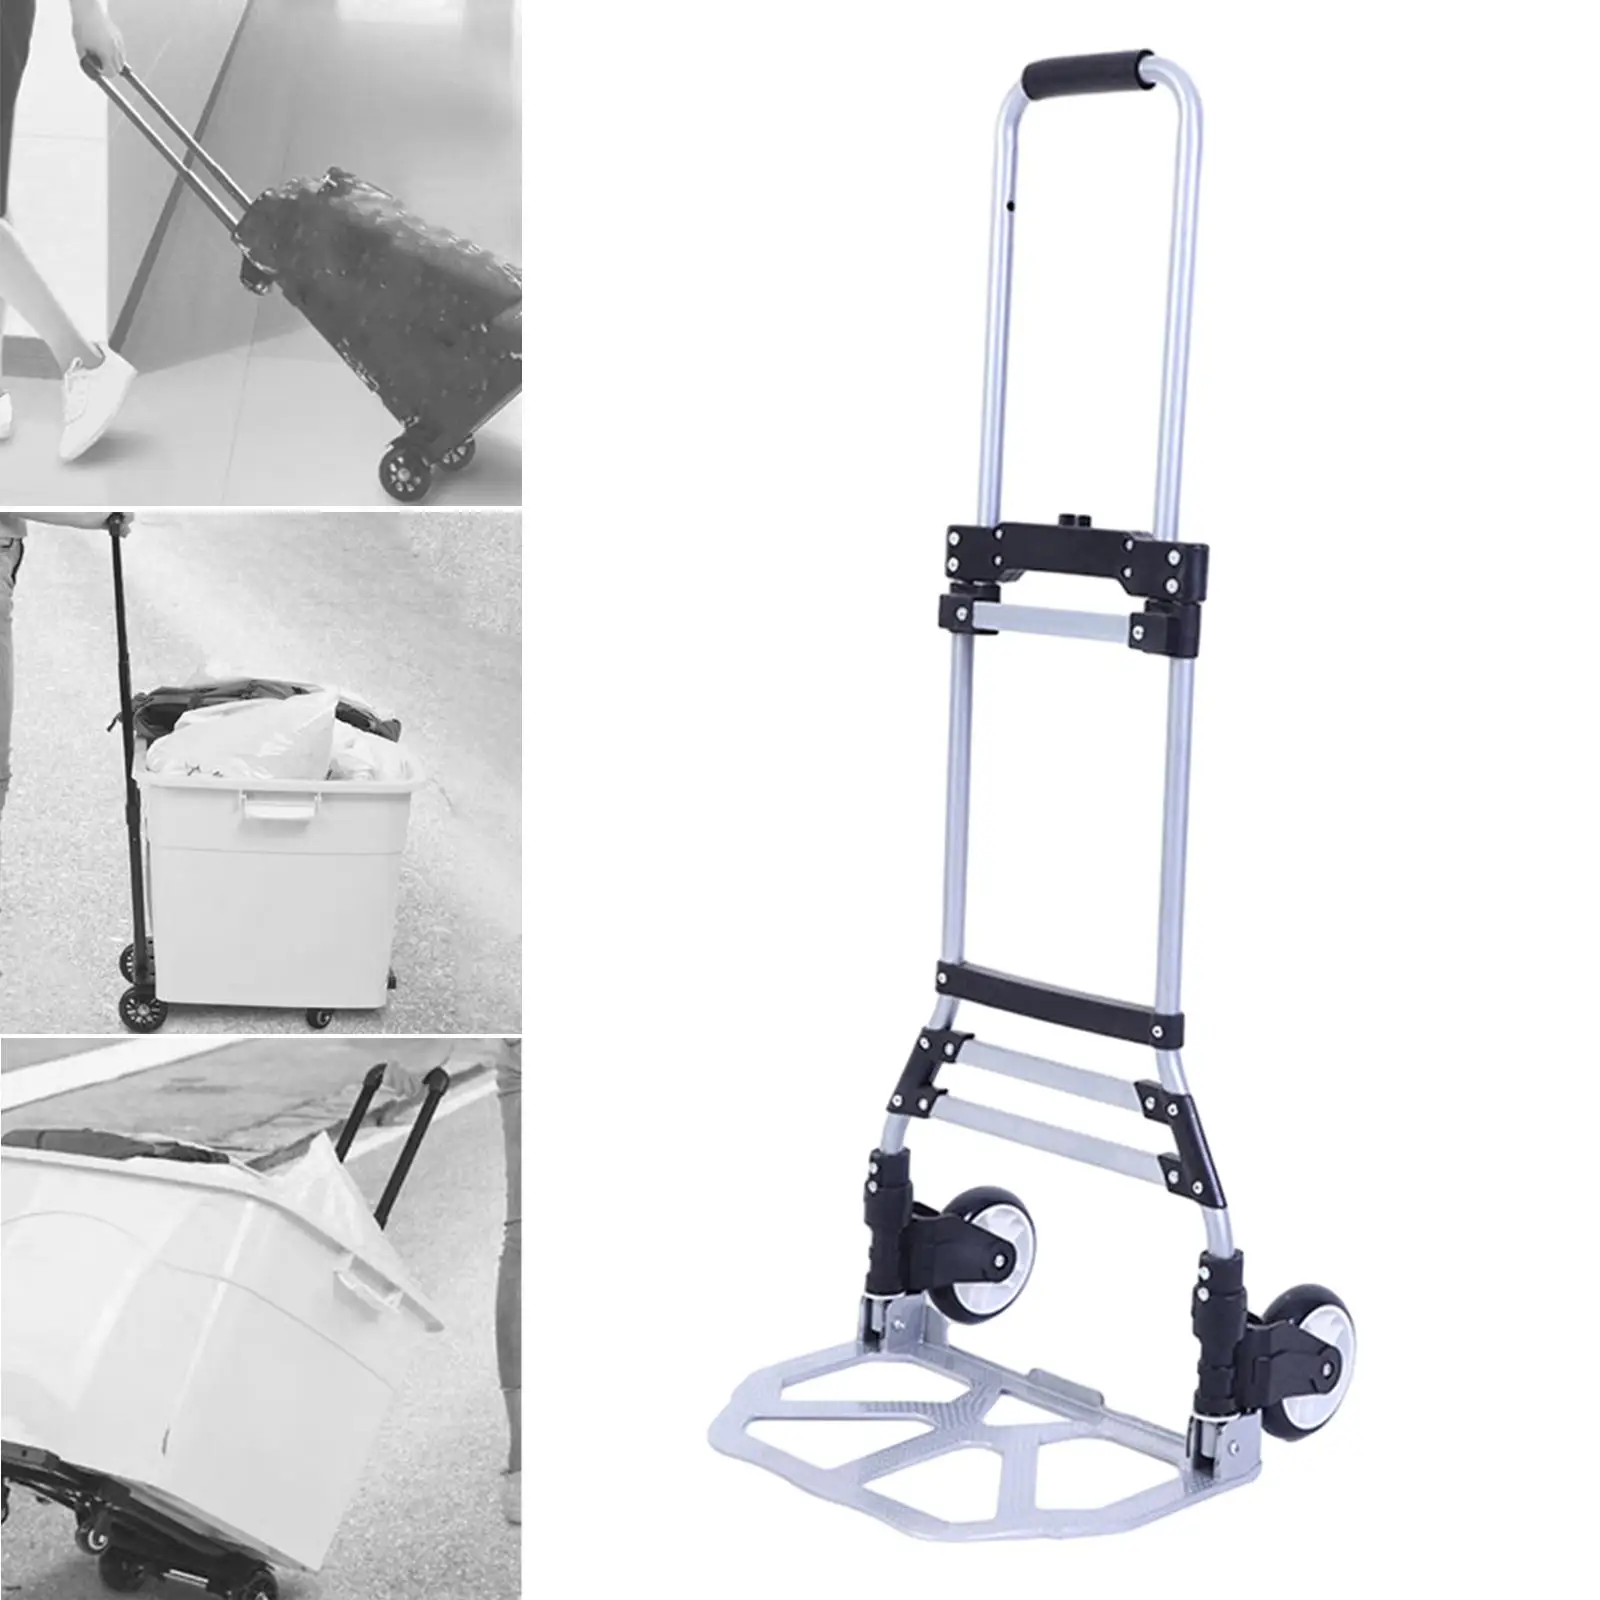 Folding Hand Truck, Folding Luggage Trolley, Foldable Roller Shopping Trolley, for Household